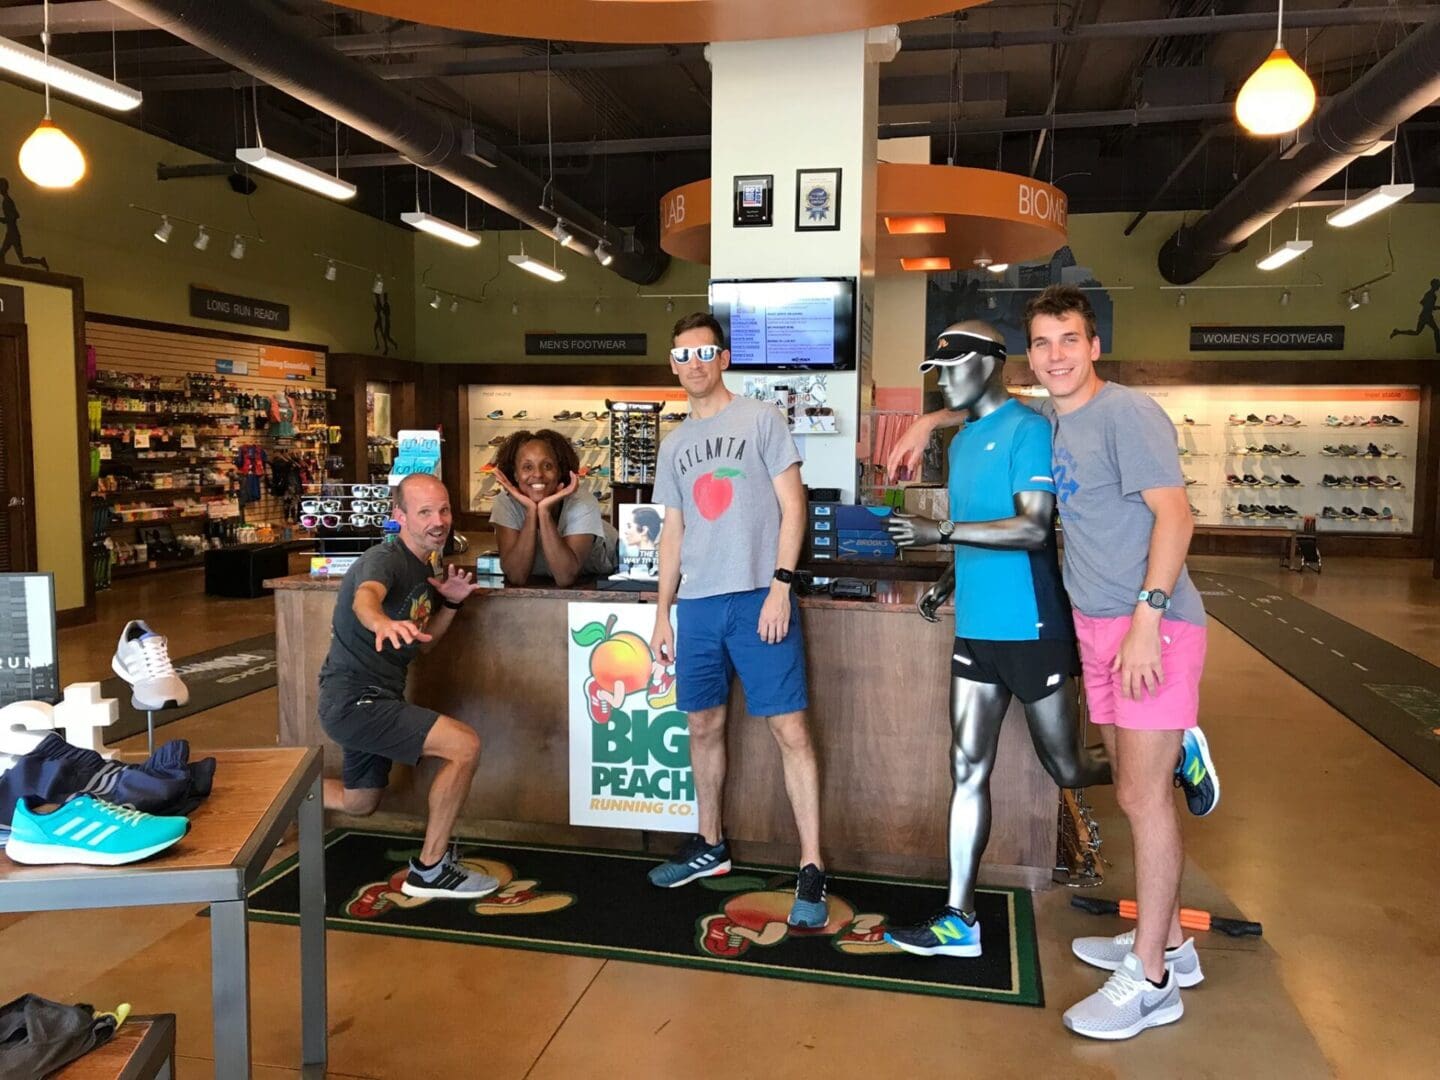 People standing at the store of big peachan making poses